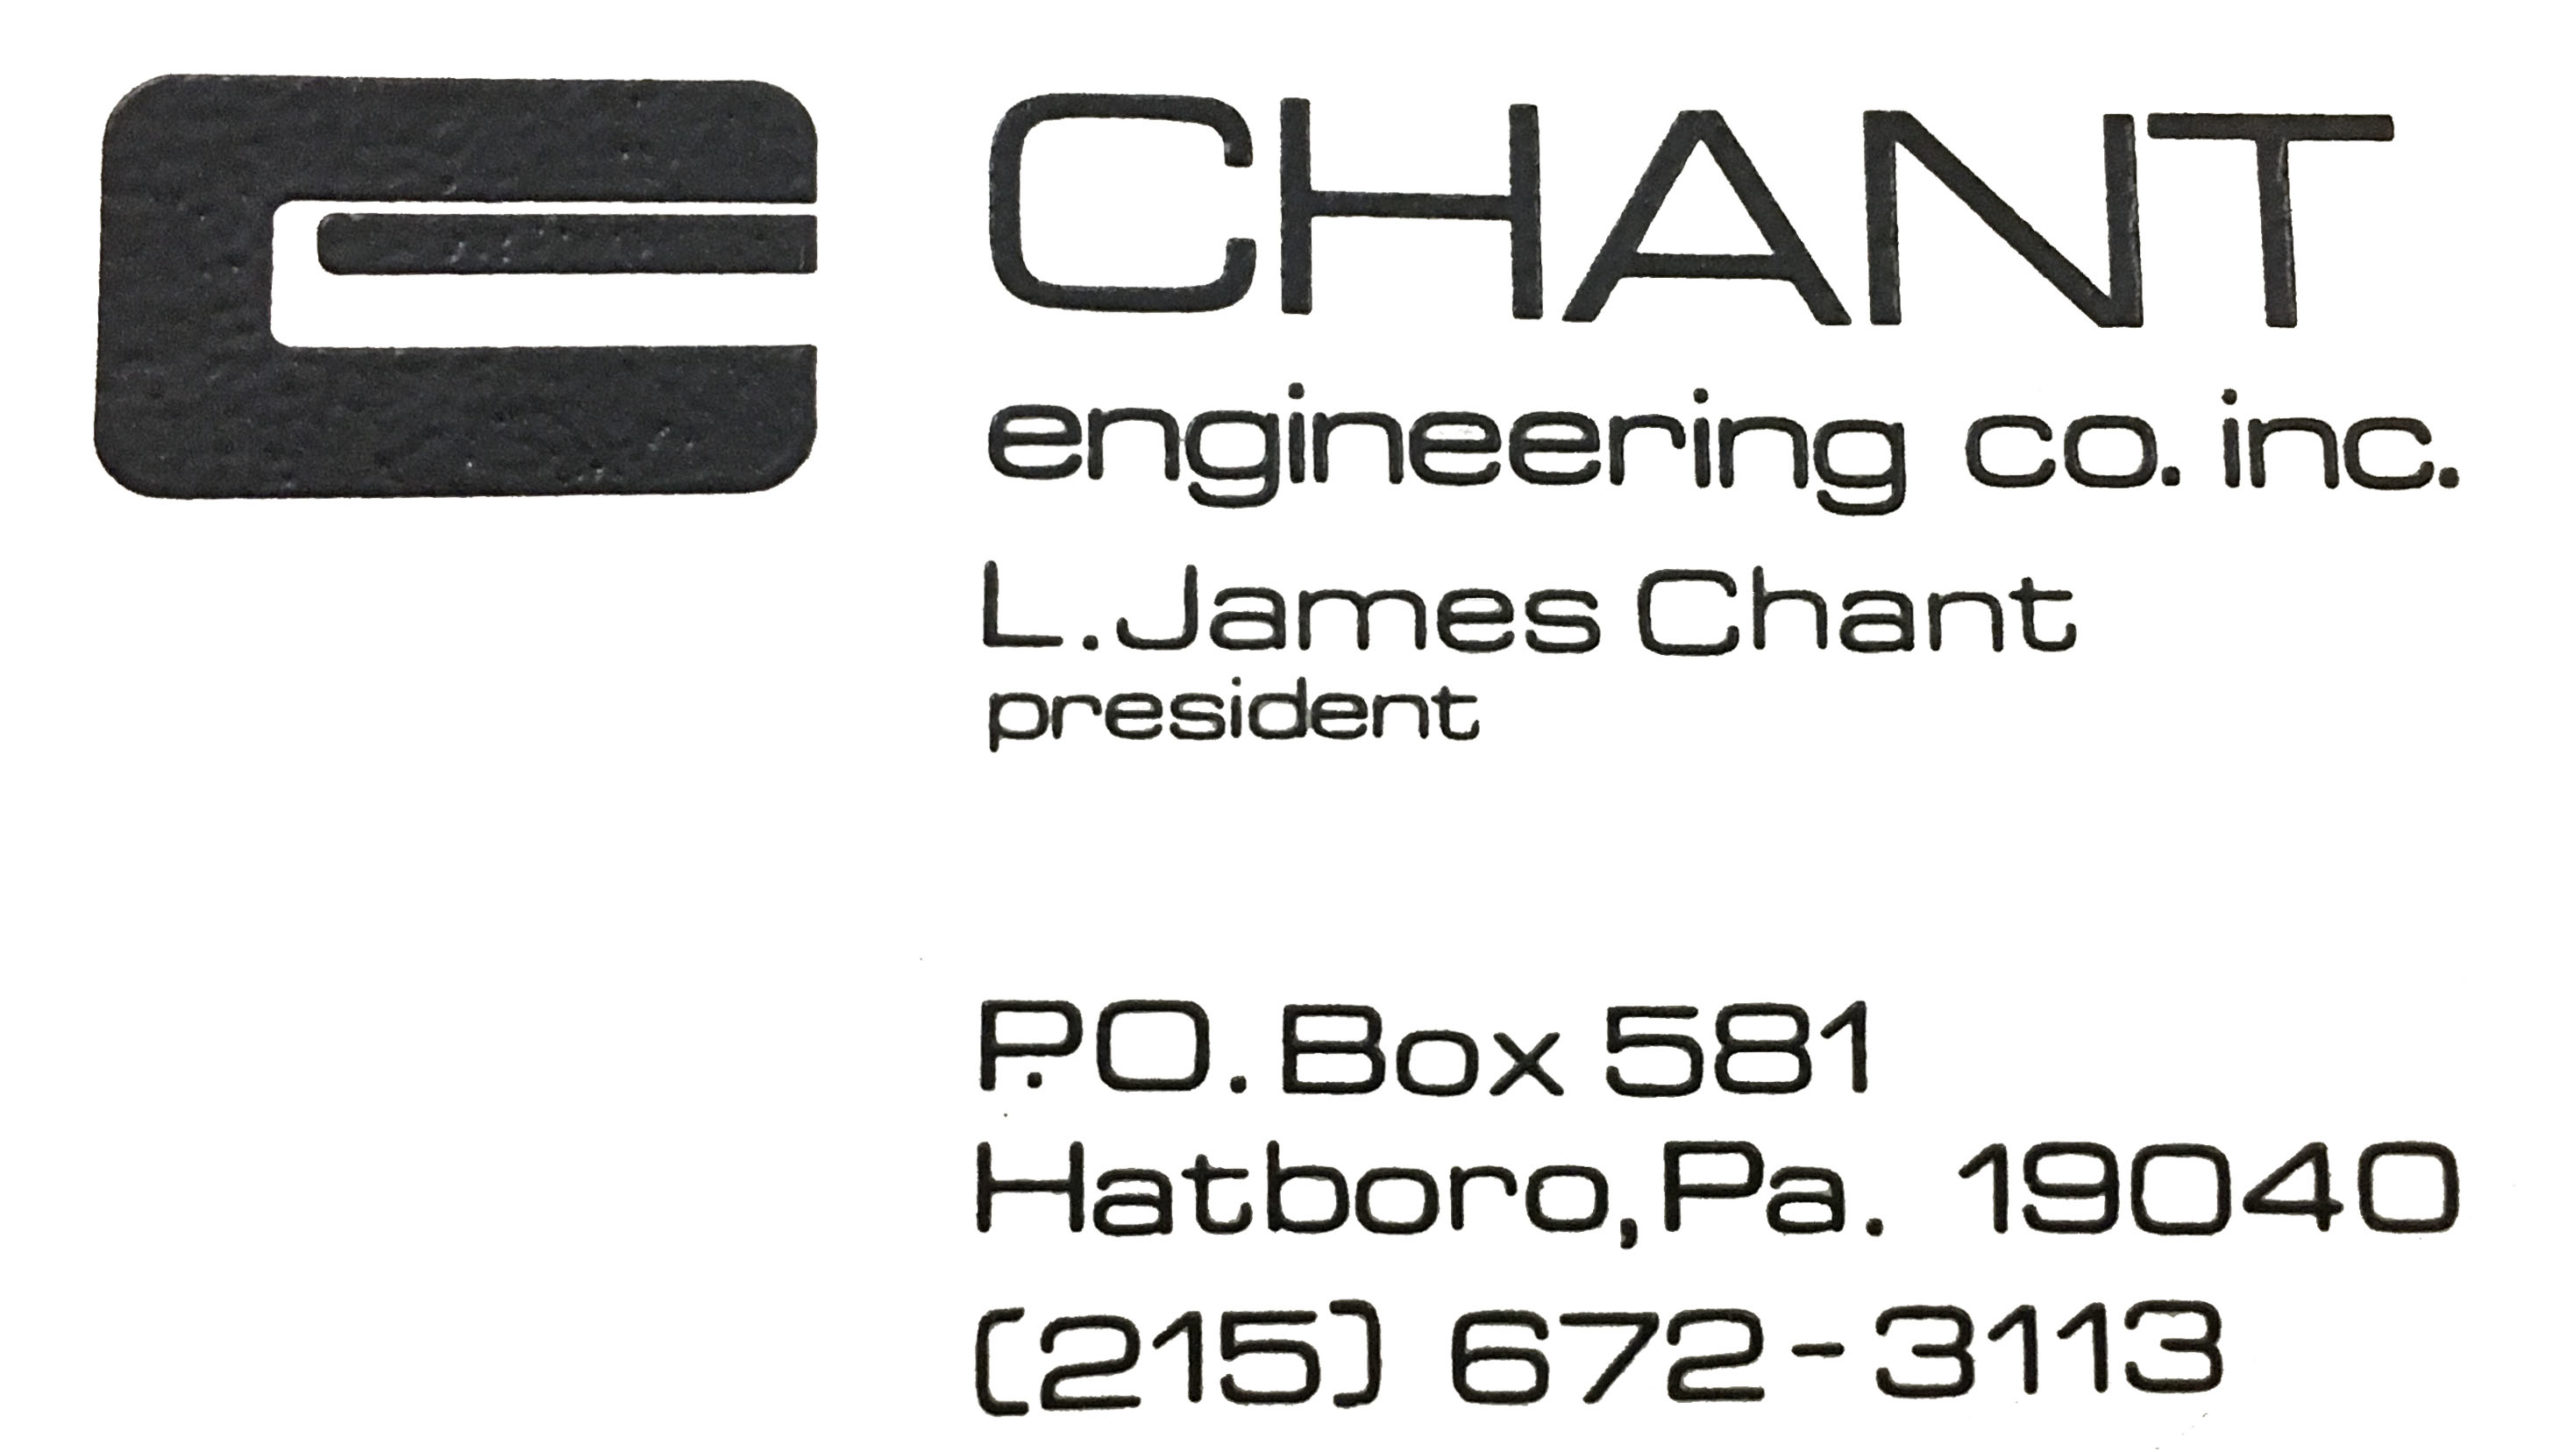 Original Chant Corporate Logo-Designed by Phil Chant in 1978